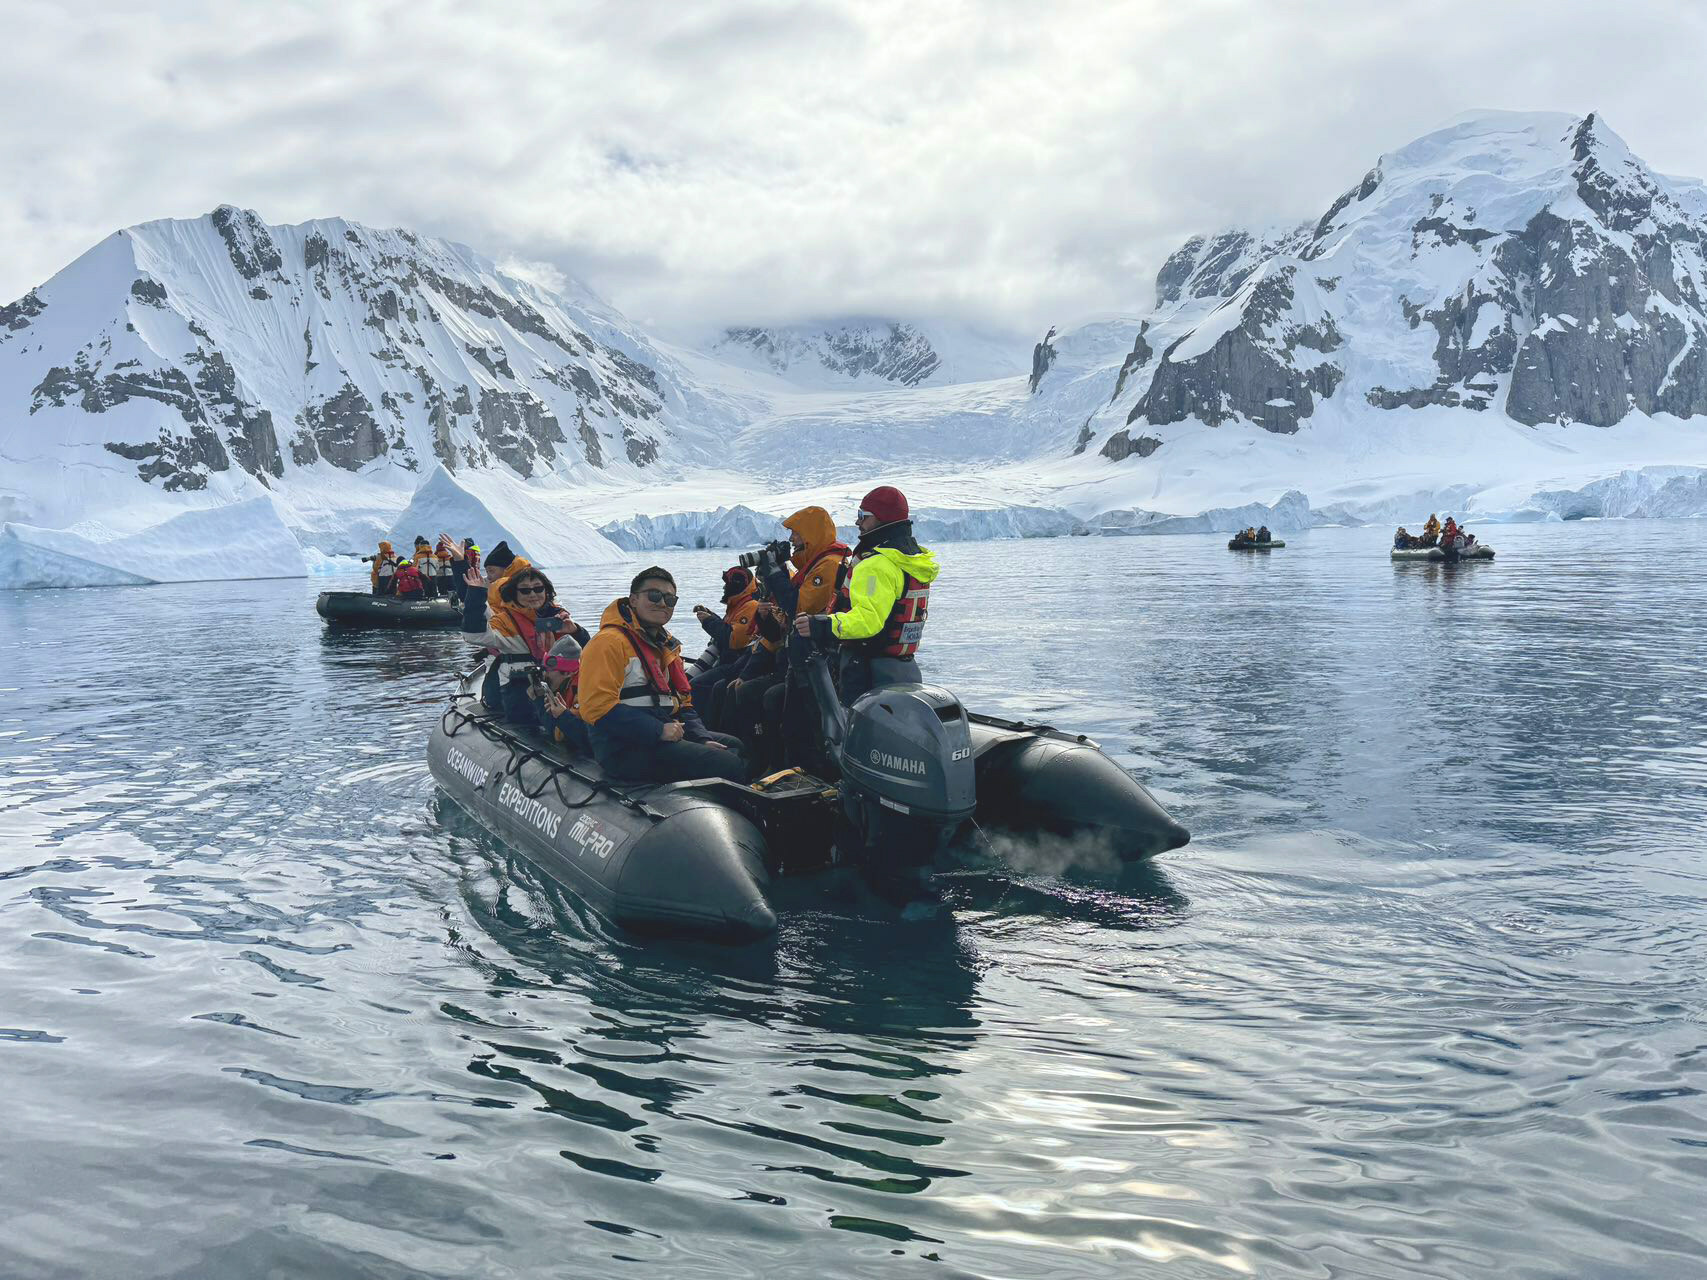 Chinese tourists experience the charm of Antarctica. (Photo by Natalia Sabrina)